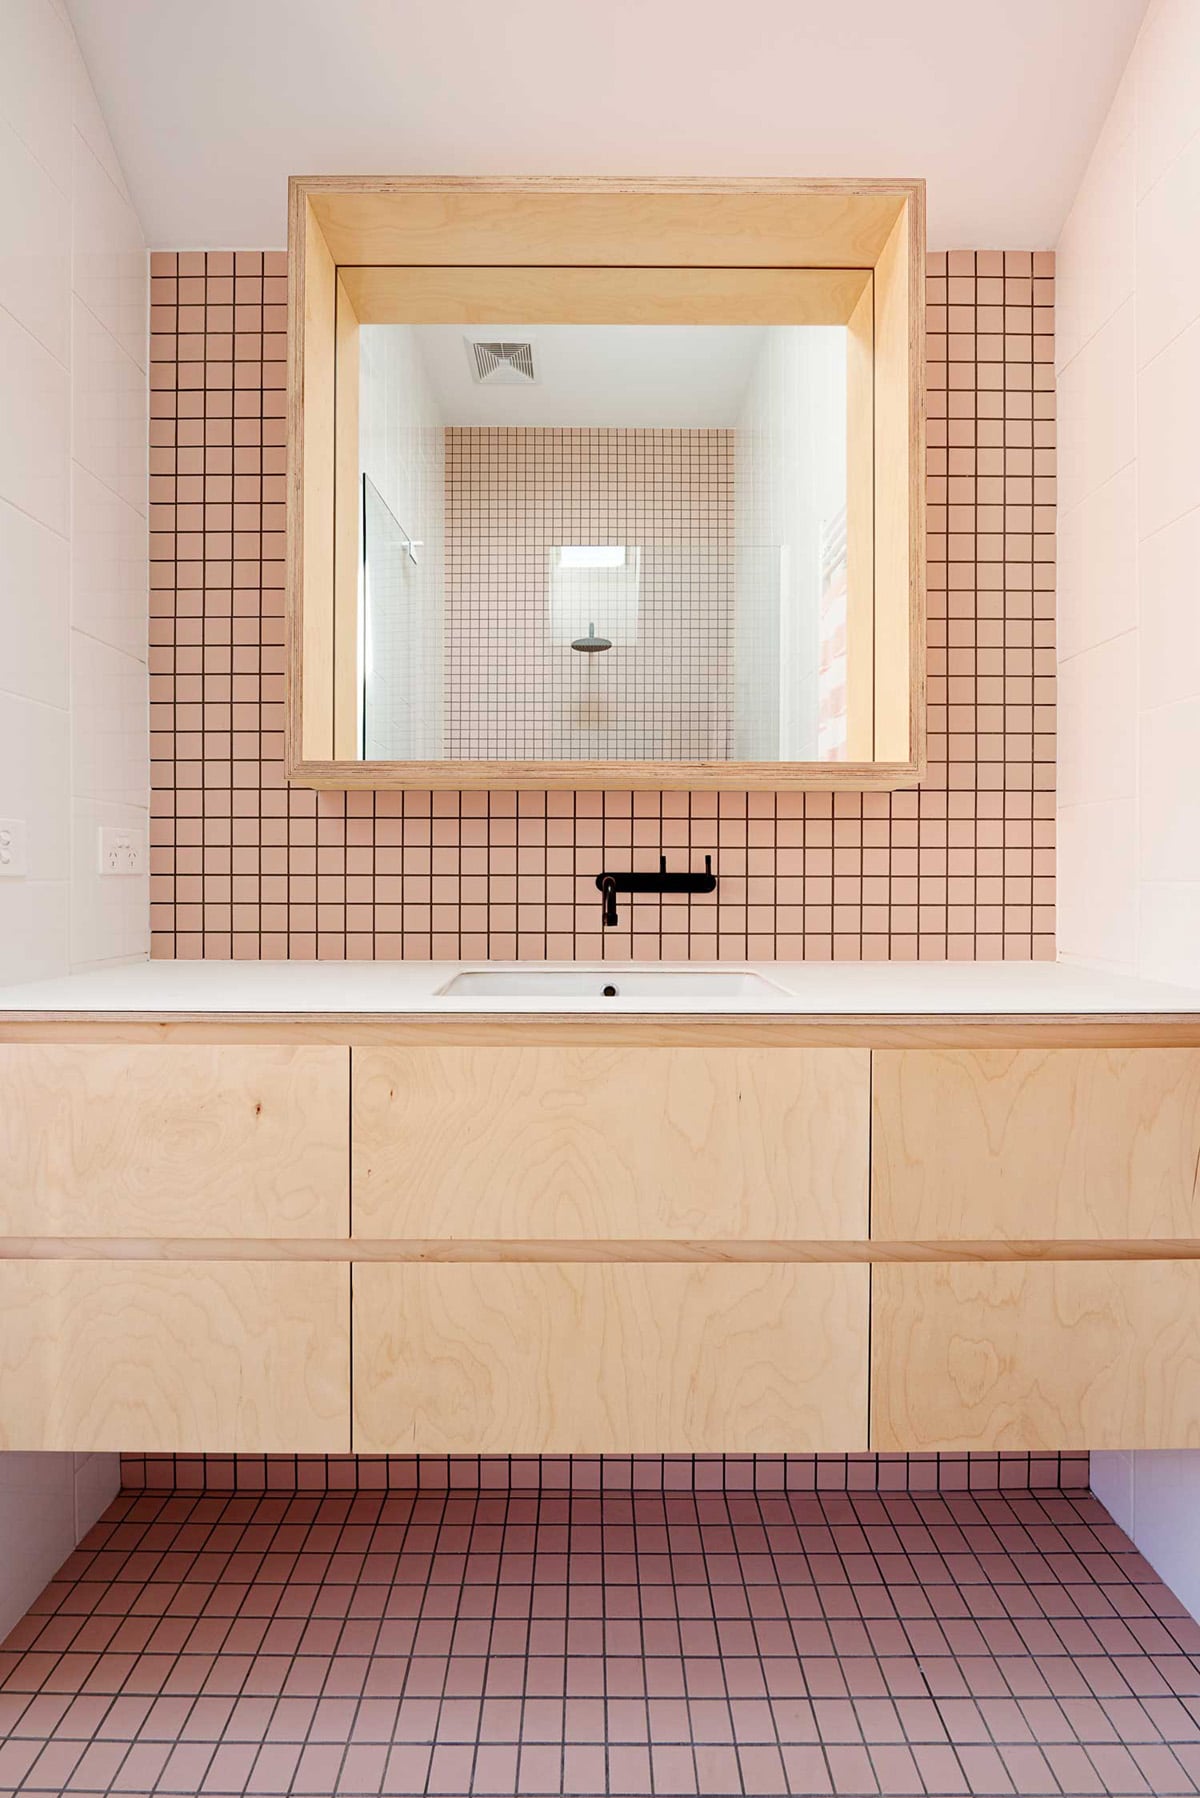 pink square tiles, light wood, black fixtures in this modern bath | coco kelley